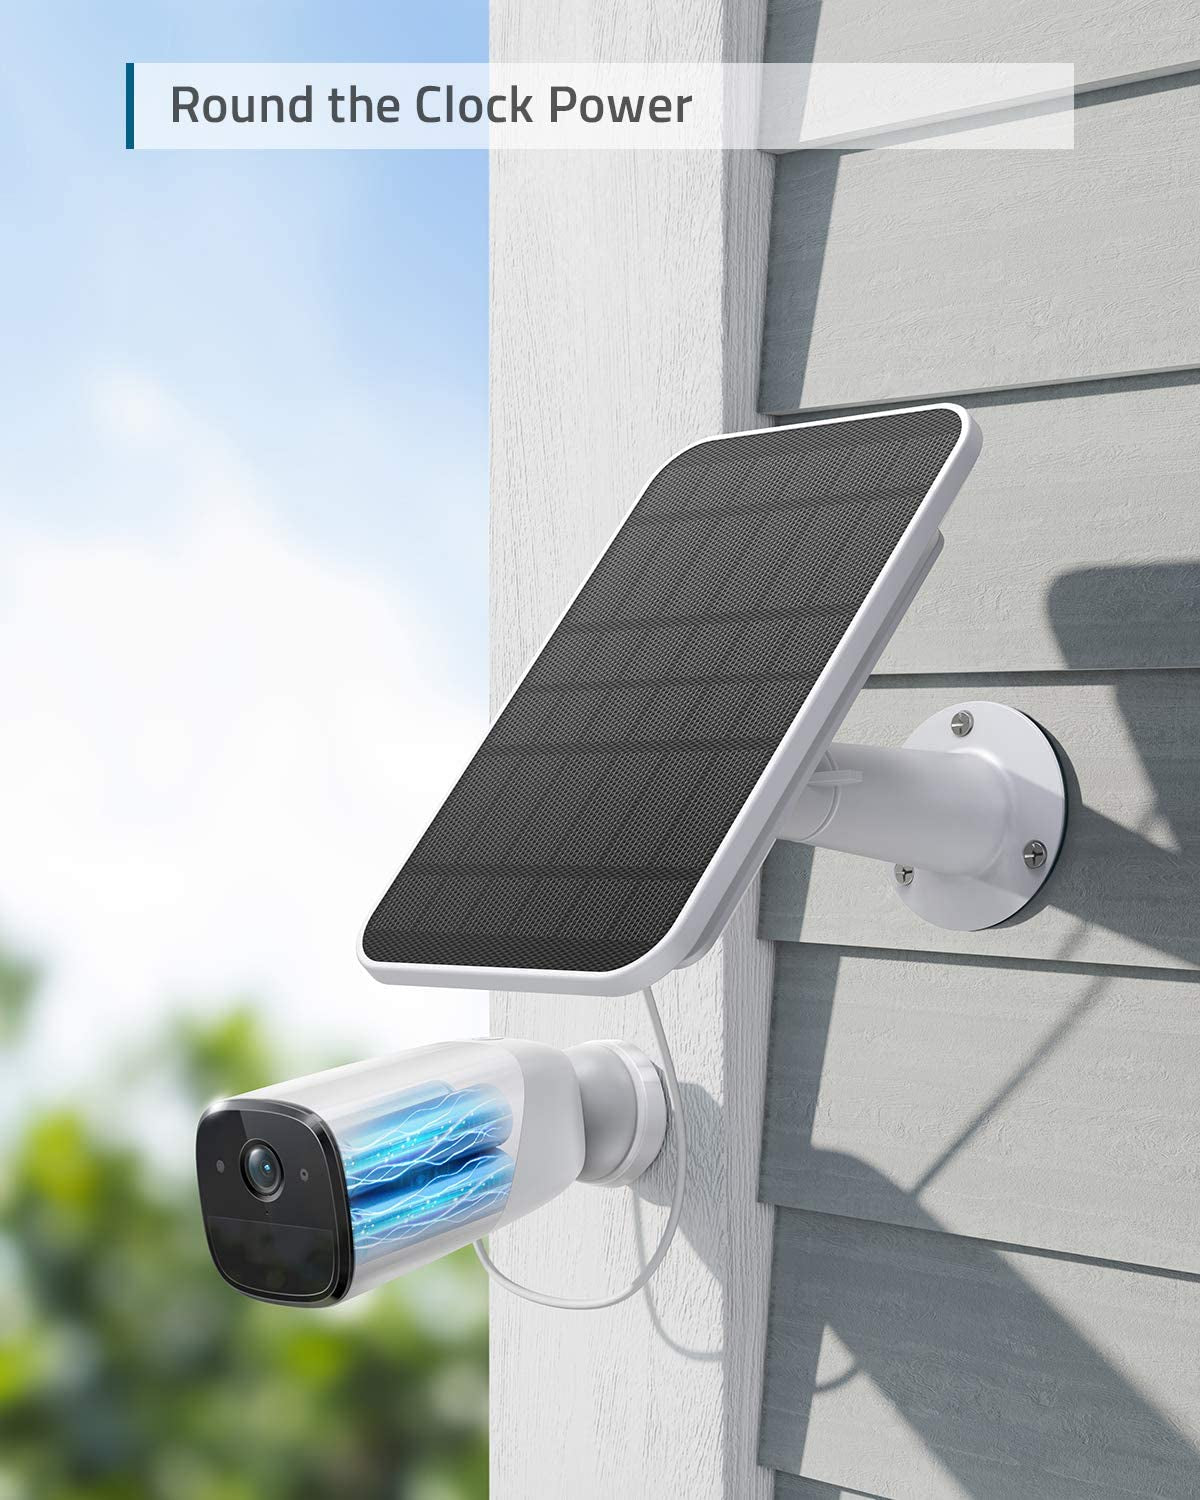 Eufy, Eufy Security by Anker Eufycam Solar Panel Charges , 360-Degree Mounting, 2.6W High-Efficiency Continuous Charge, IP65 Weatherproof White,T8700021